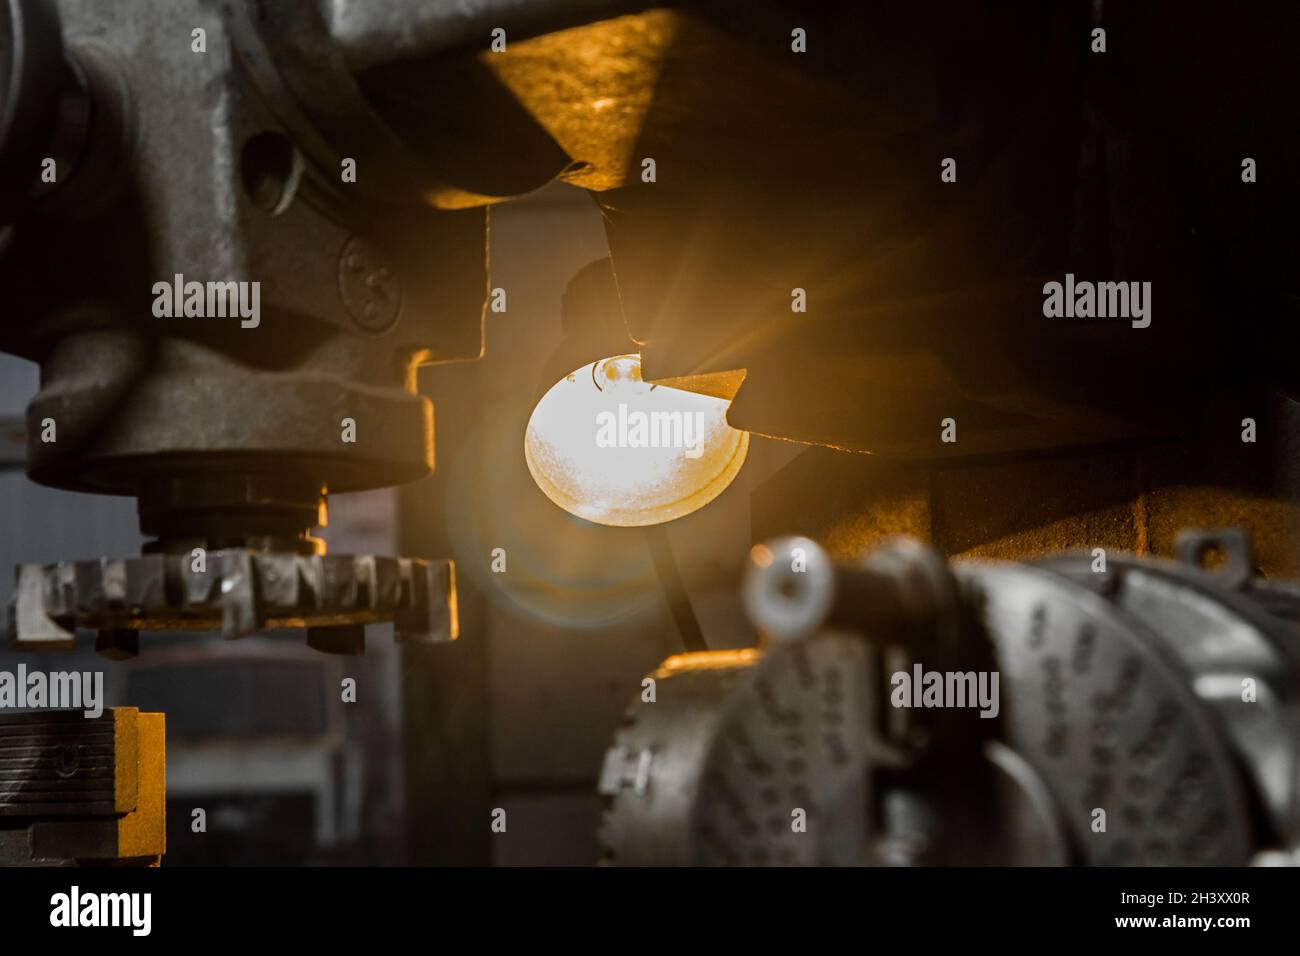 Industrial lighting element lamp on an old milling machine for metal processing in an industrial plant. Stock Photo